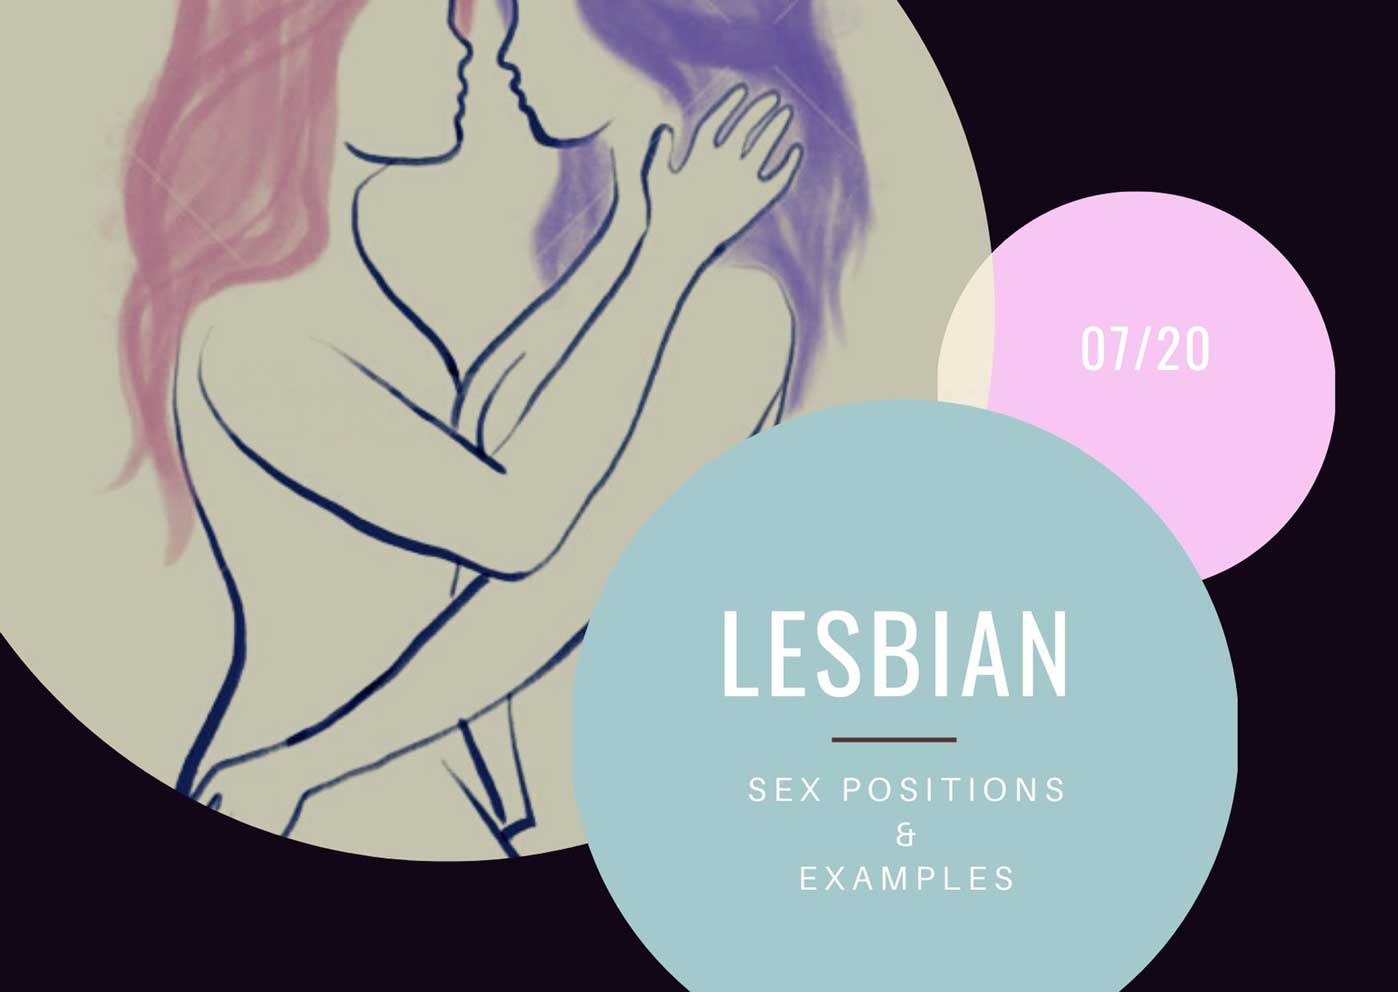 Sex of positions in Tampa